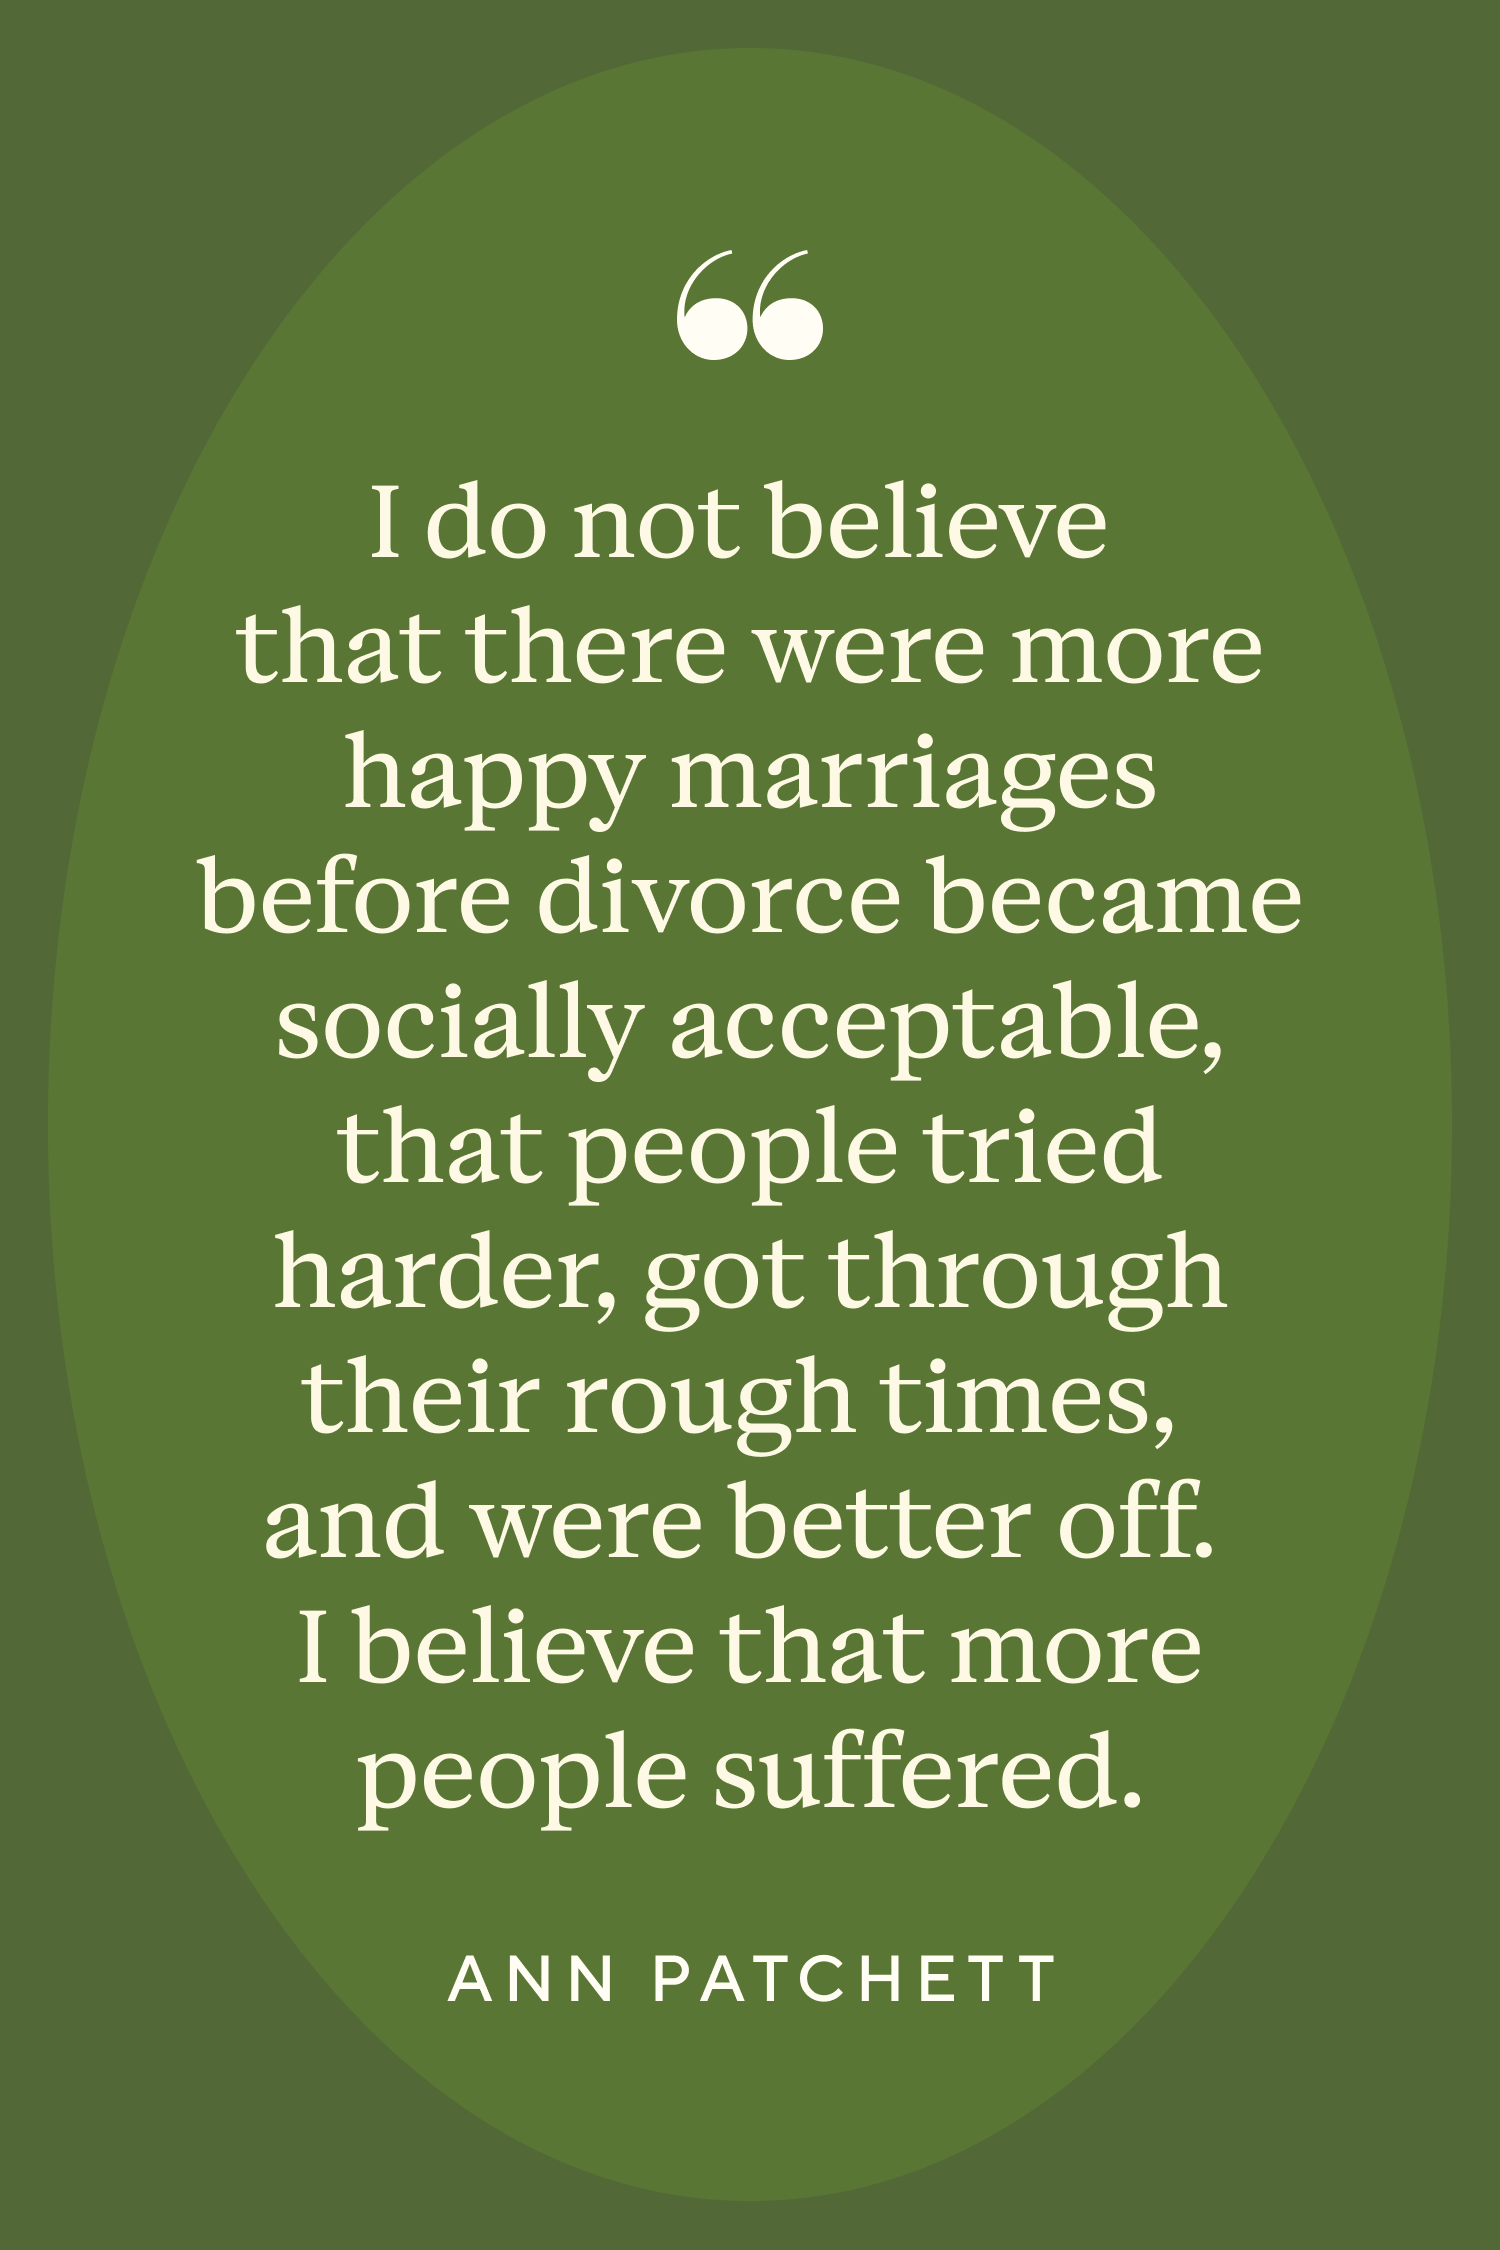 just divorced quotes